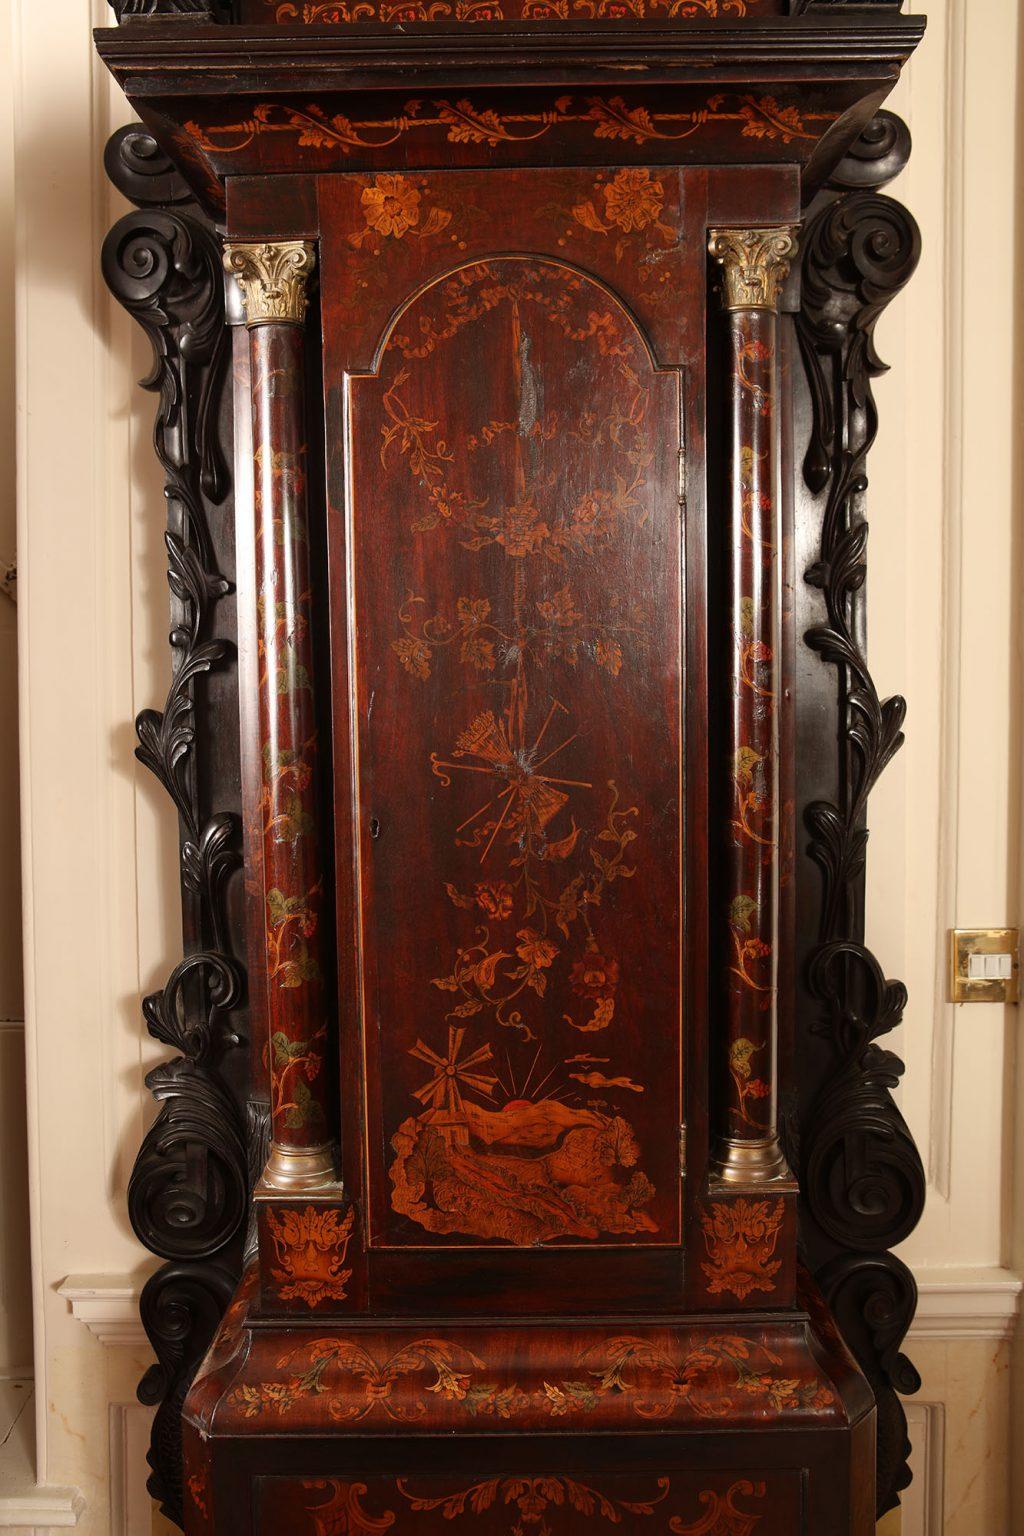 Early 20th-century longcase marquetry clock of exceptional proportions, the body of the clock with marquetry panels and flanked by richly carved side panels and raised on hairy paw feet.
Possibly Ireland, circa 1900
Measures: Height 3 meters